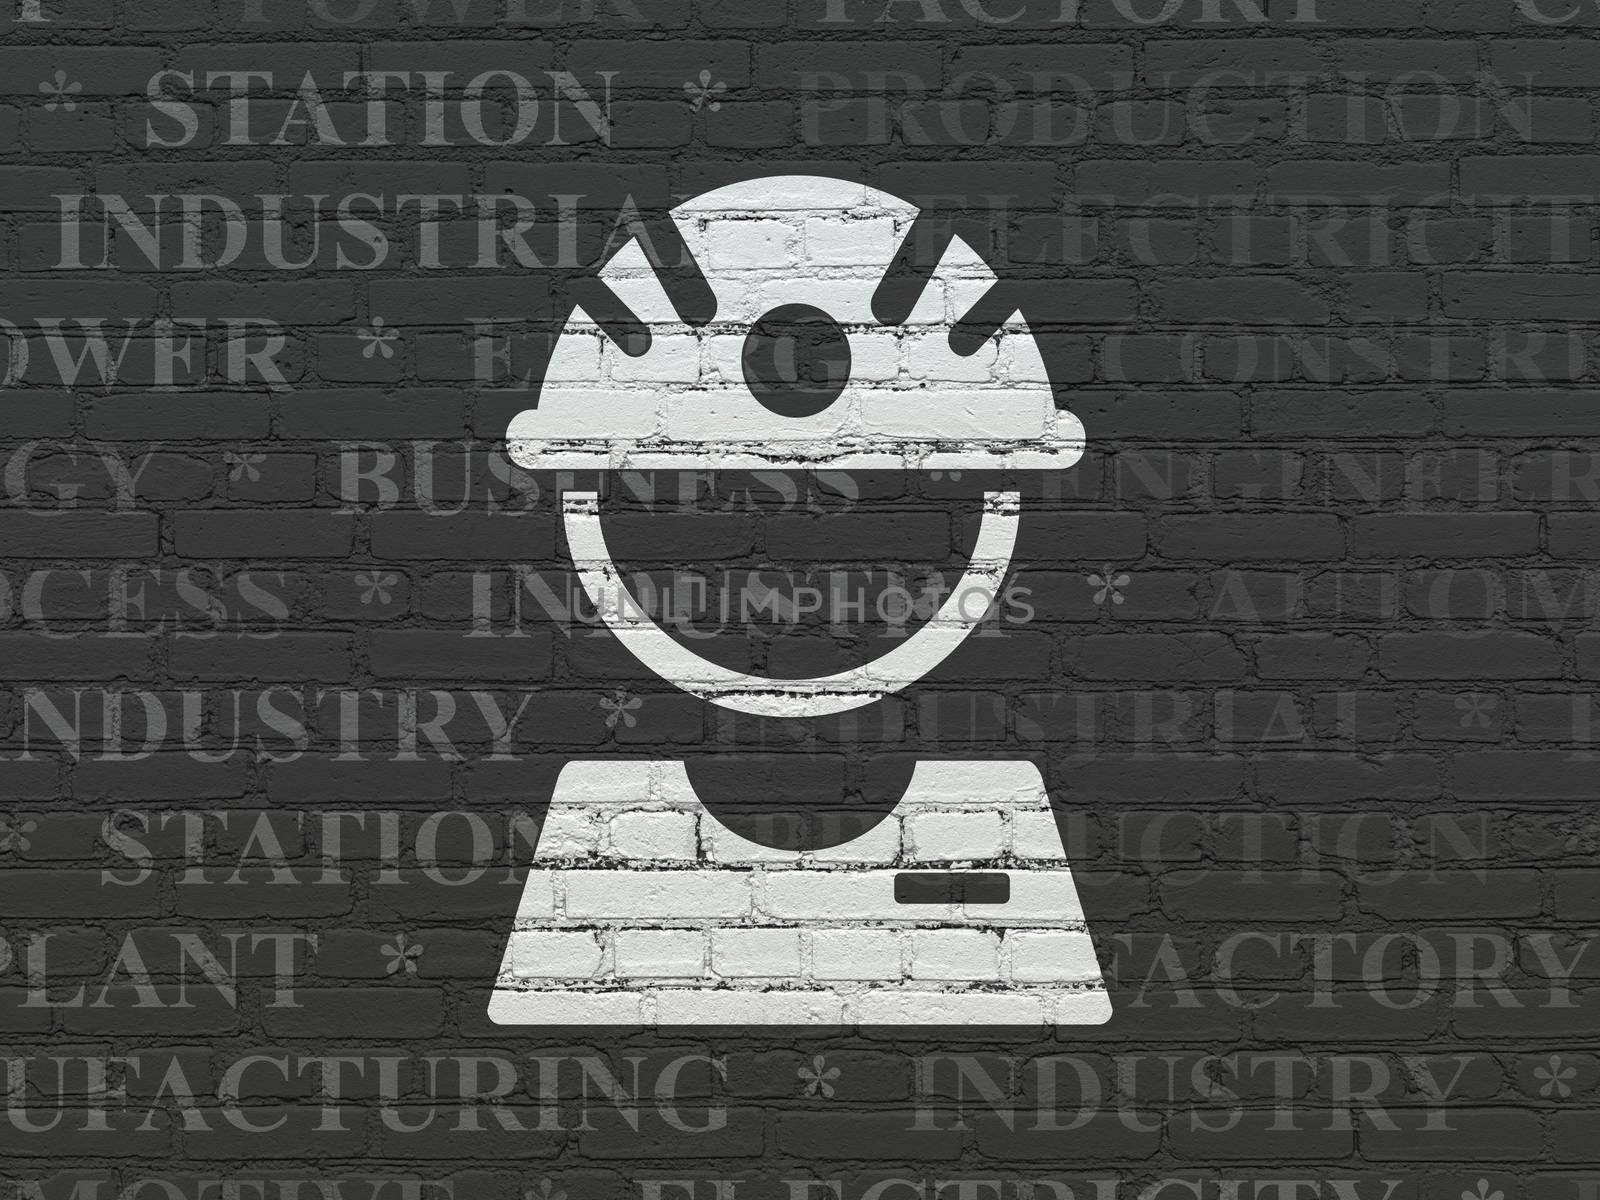 Industry concept: Painted white Factory Worker icon on Black Brick wall background with  Tag Cloud